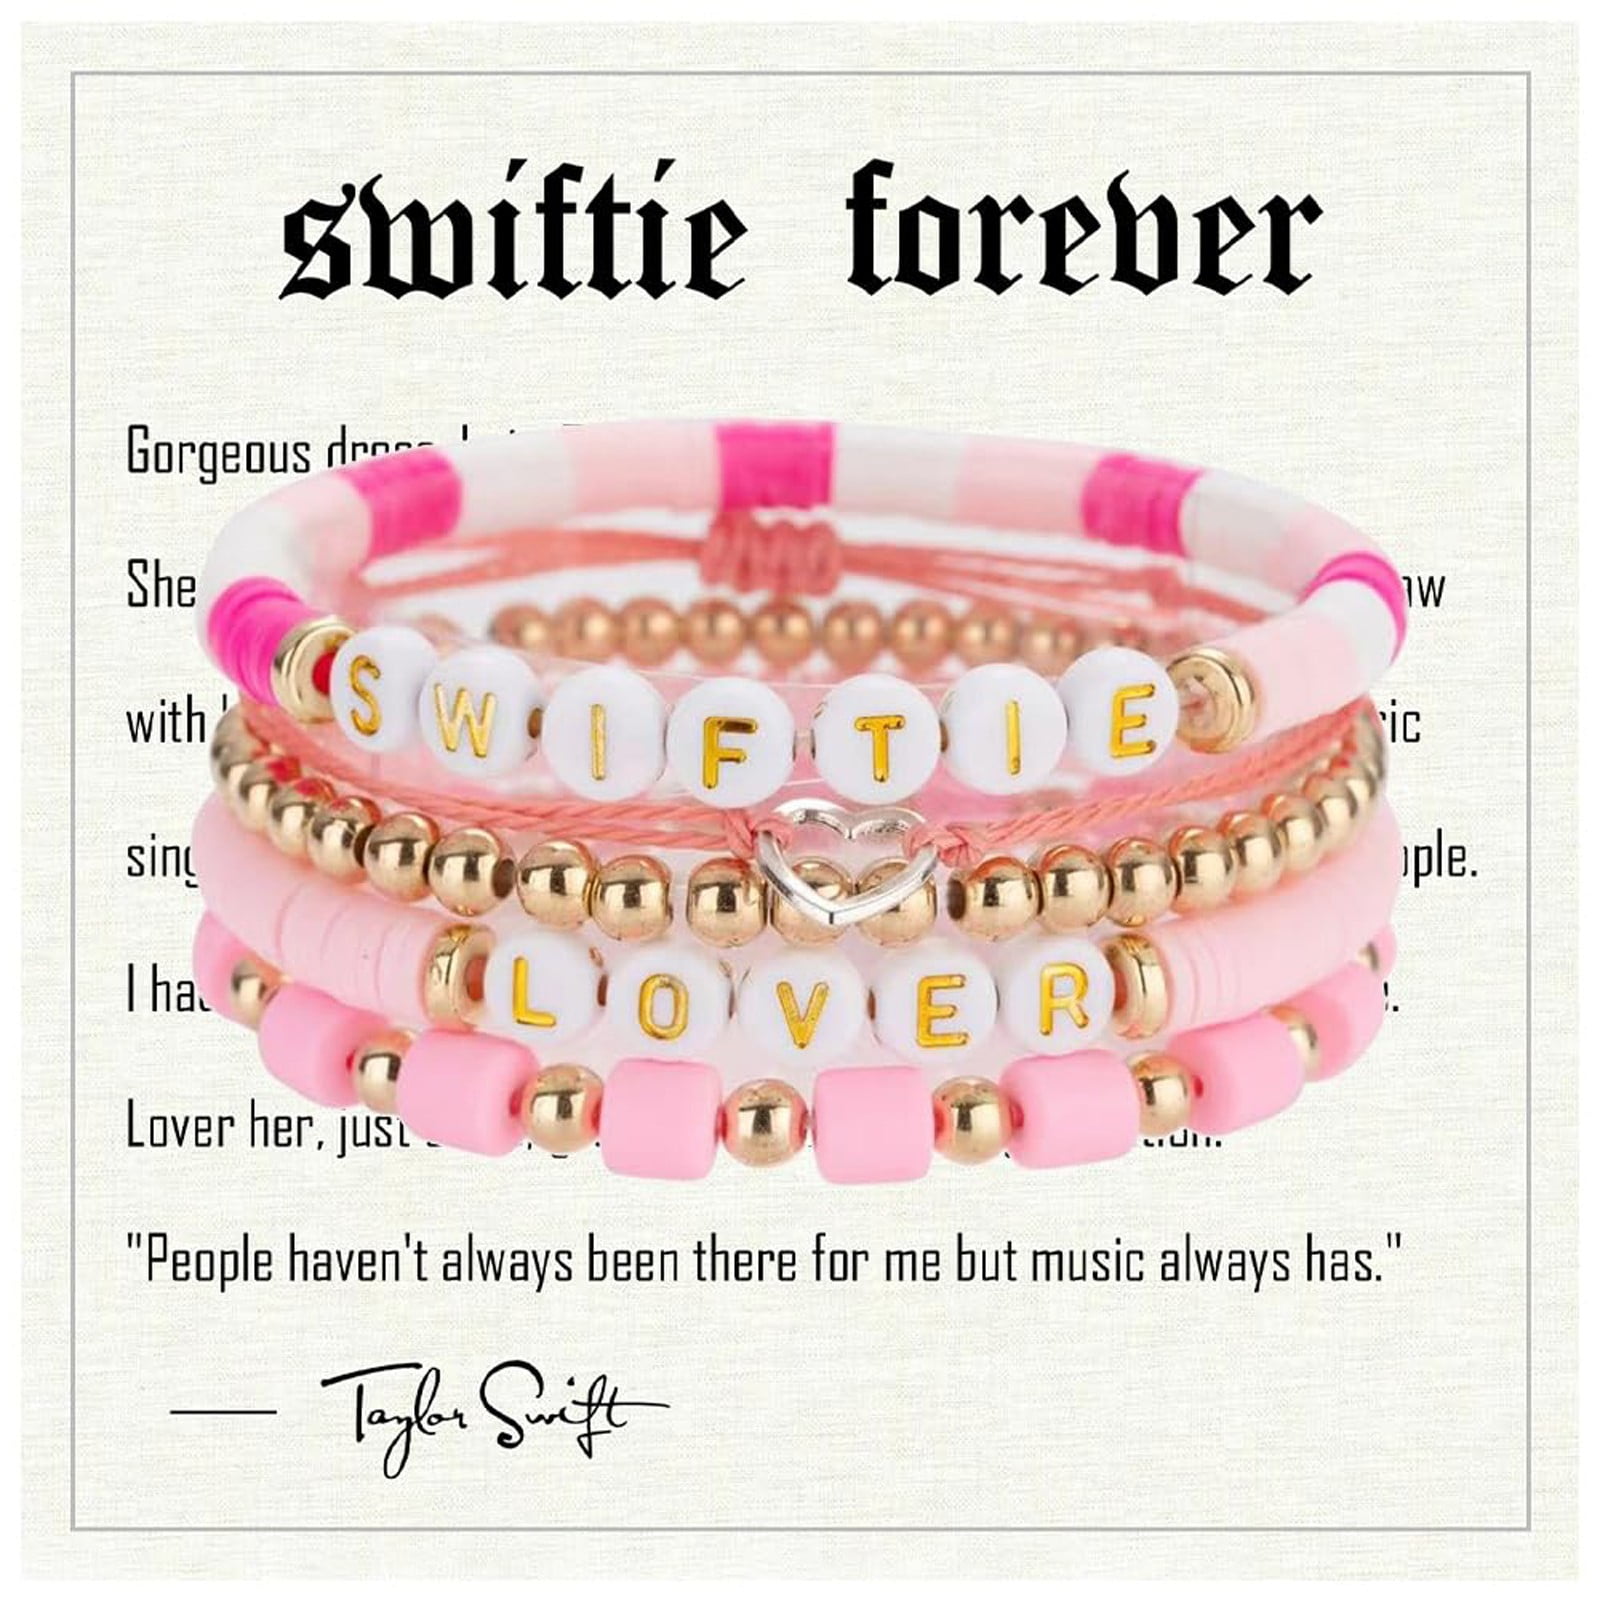 Taylor Swift Themed charm bracelet Eras Tour, 1989, Red, Midnights, lover -  $19 New With Tags - From Danielle